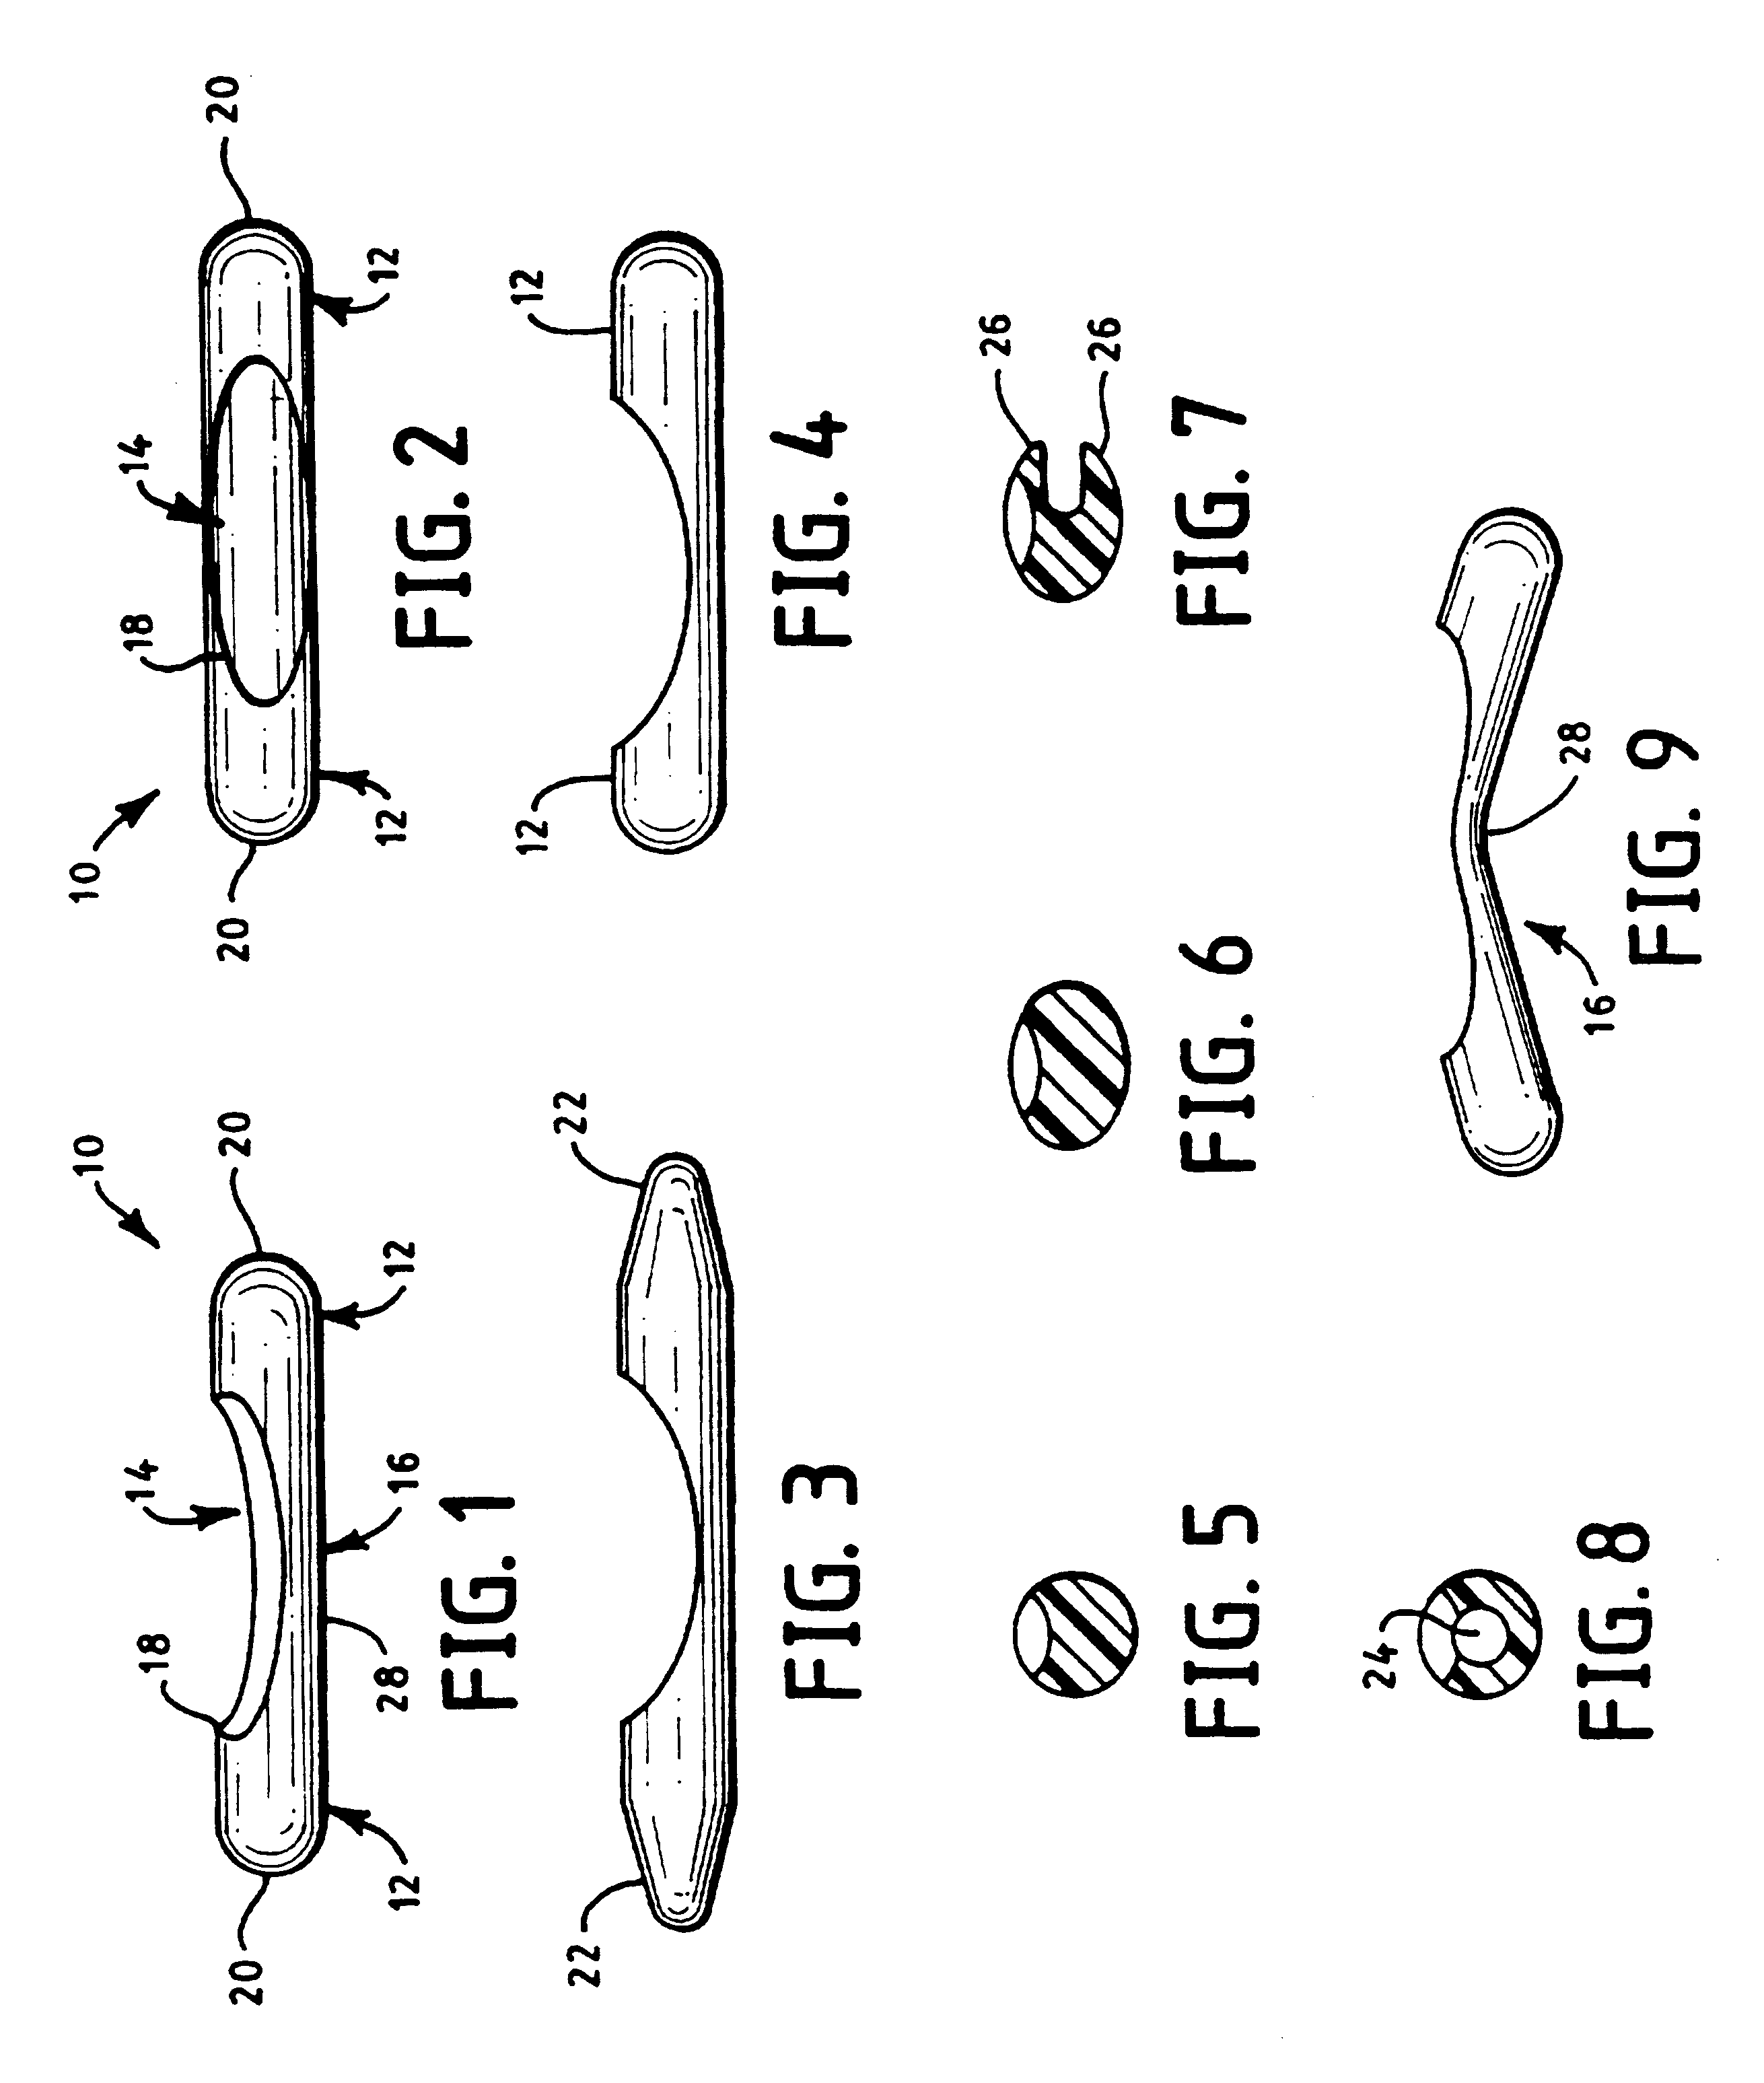 Device and method for the surgical anastomasis of tubular structures